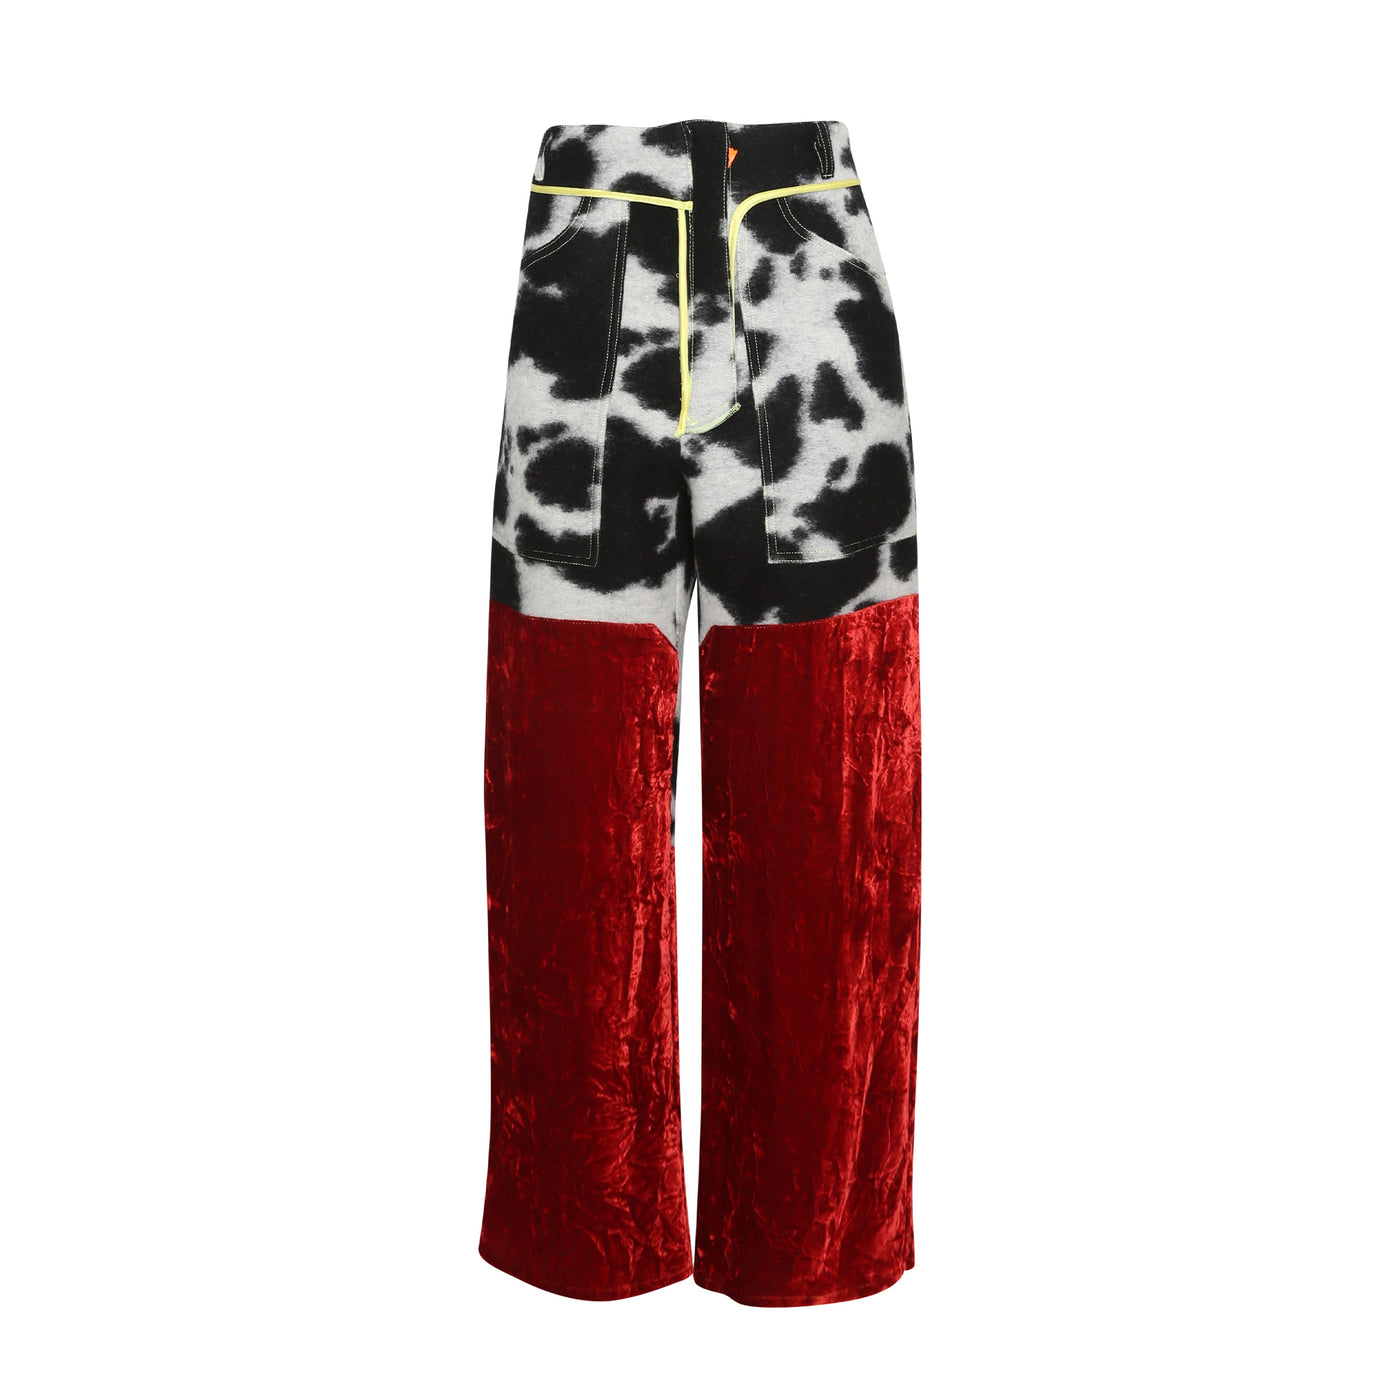 Oloapitreps Bloody Cow Pants